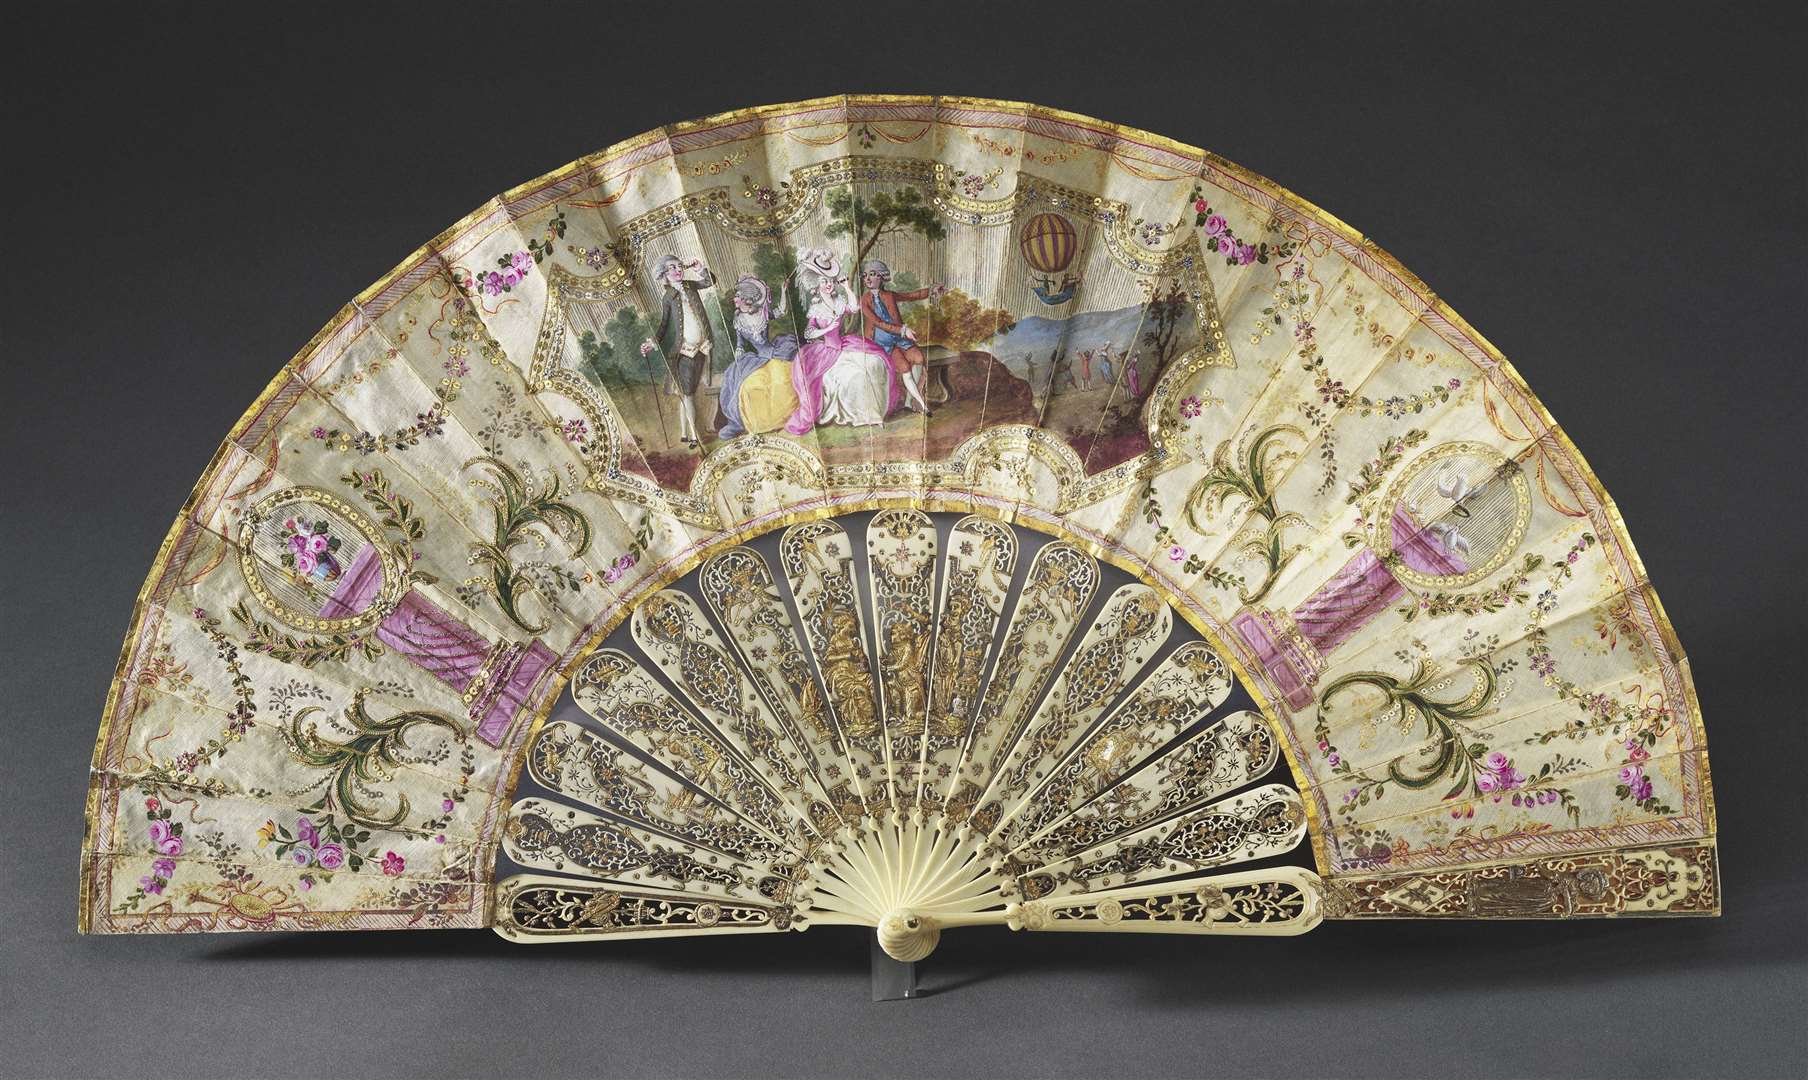 French, Fan depicting ‘The Ascent of M. Charles’s and M. Robert’s Balloon, 1783’ is part of the exhibition. Royal Collection Trust